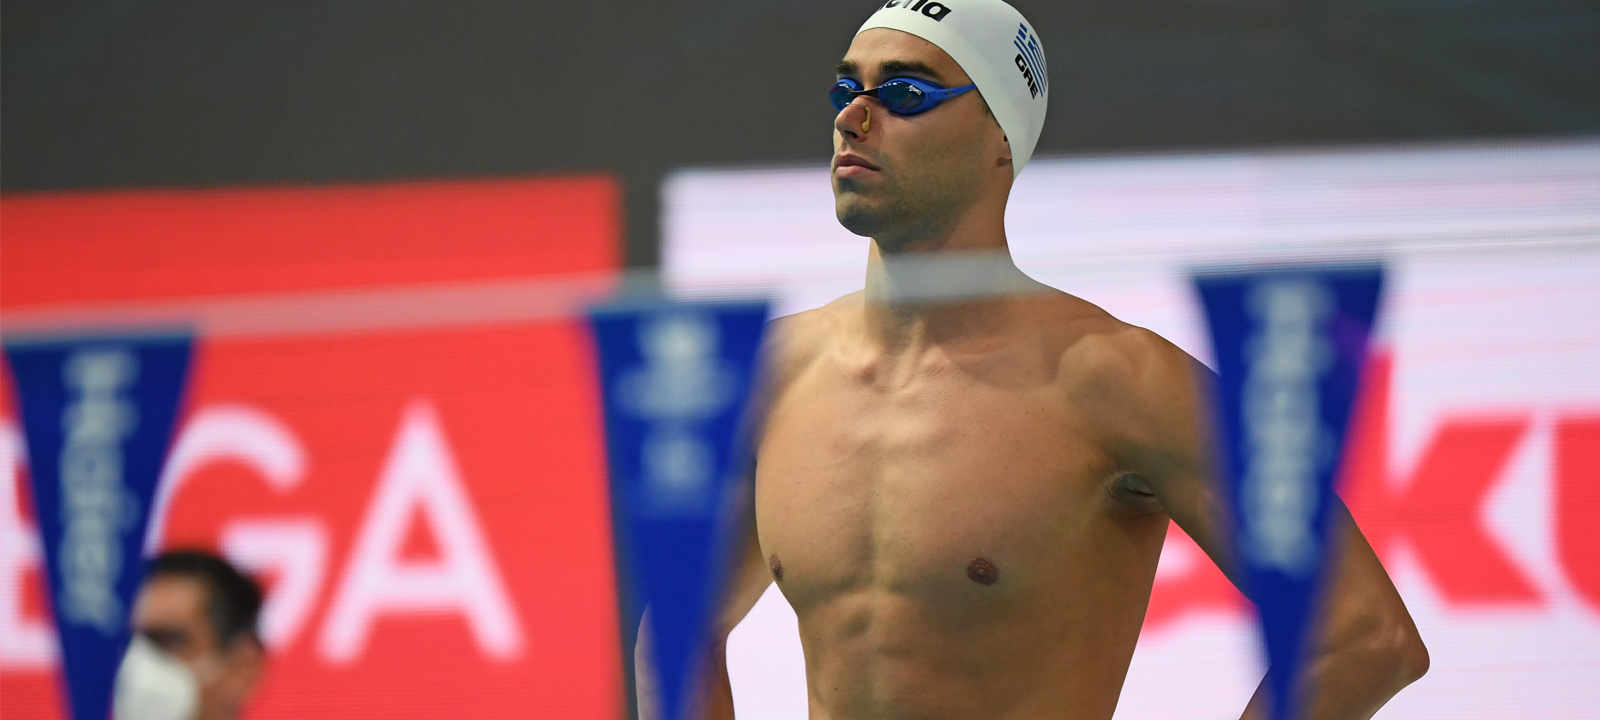 Christou & Ceccon Check In With National Records As 1-2 In 50 Backstroke